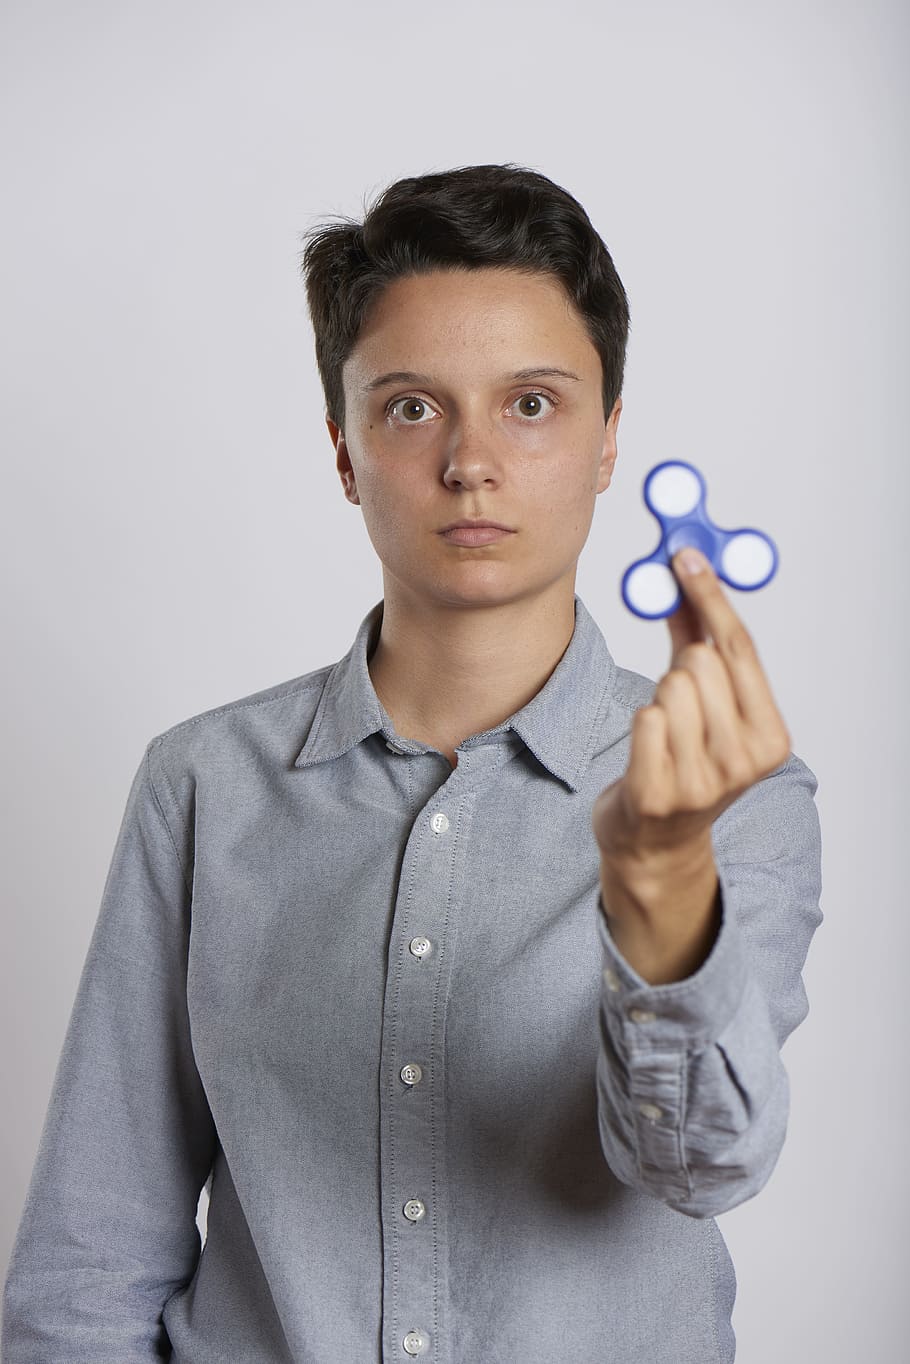 fidget spinner, woman, holding, play, toy, fad, game, gadget